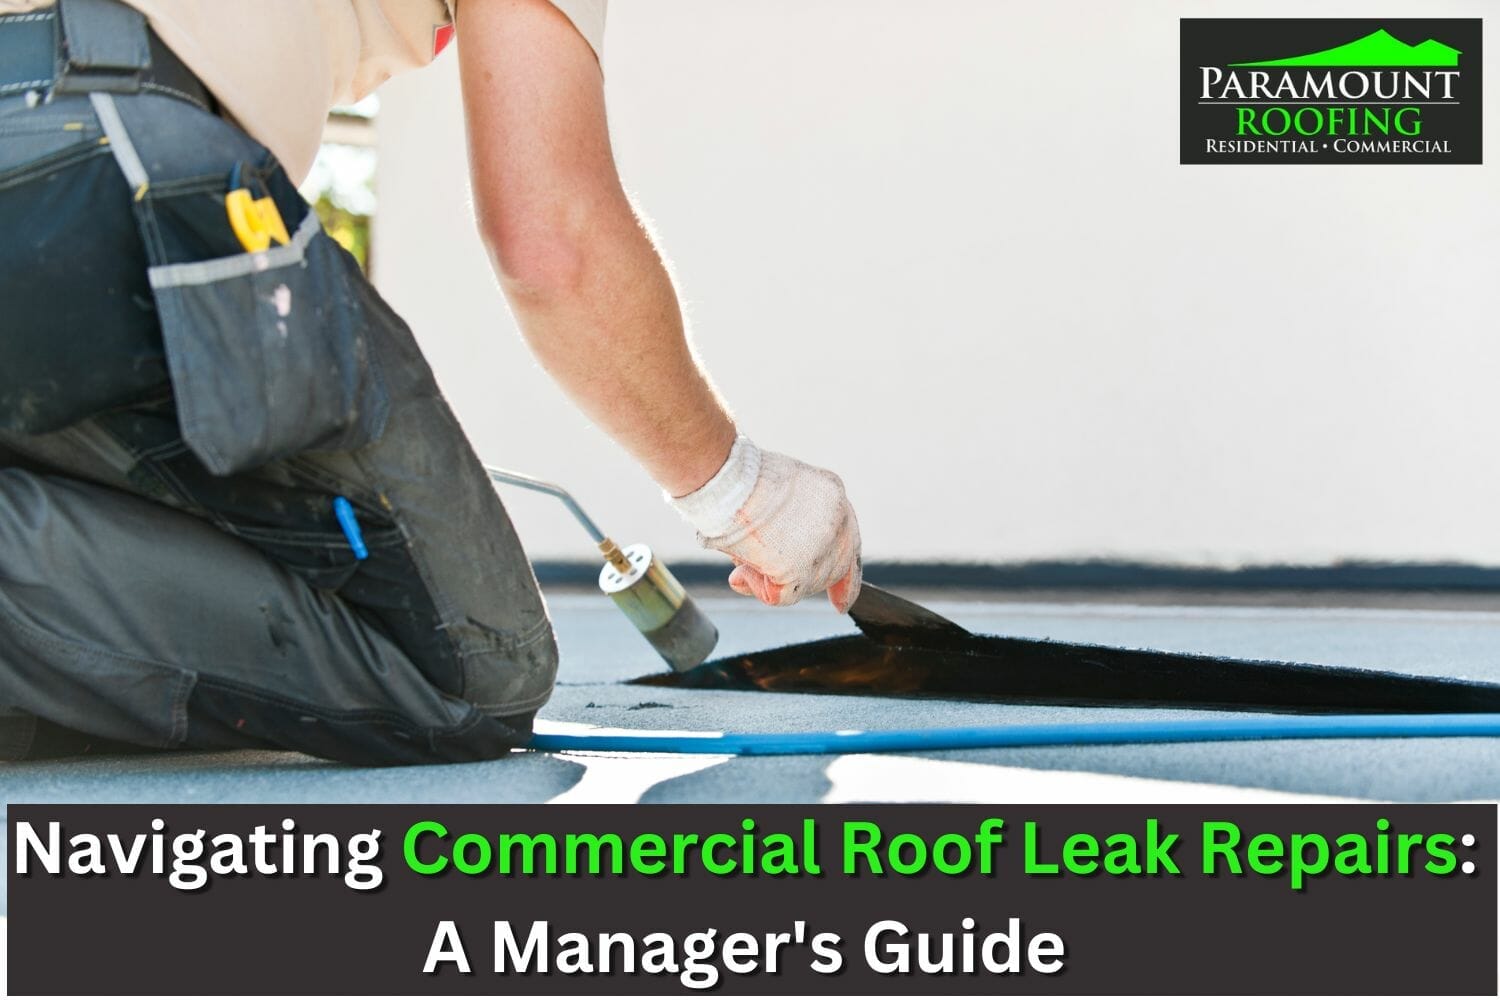 Navigating Commercial Roof Leak Repairs: A Manager’s Guide